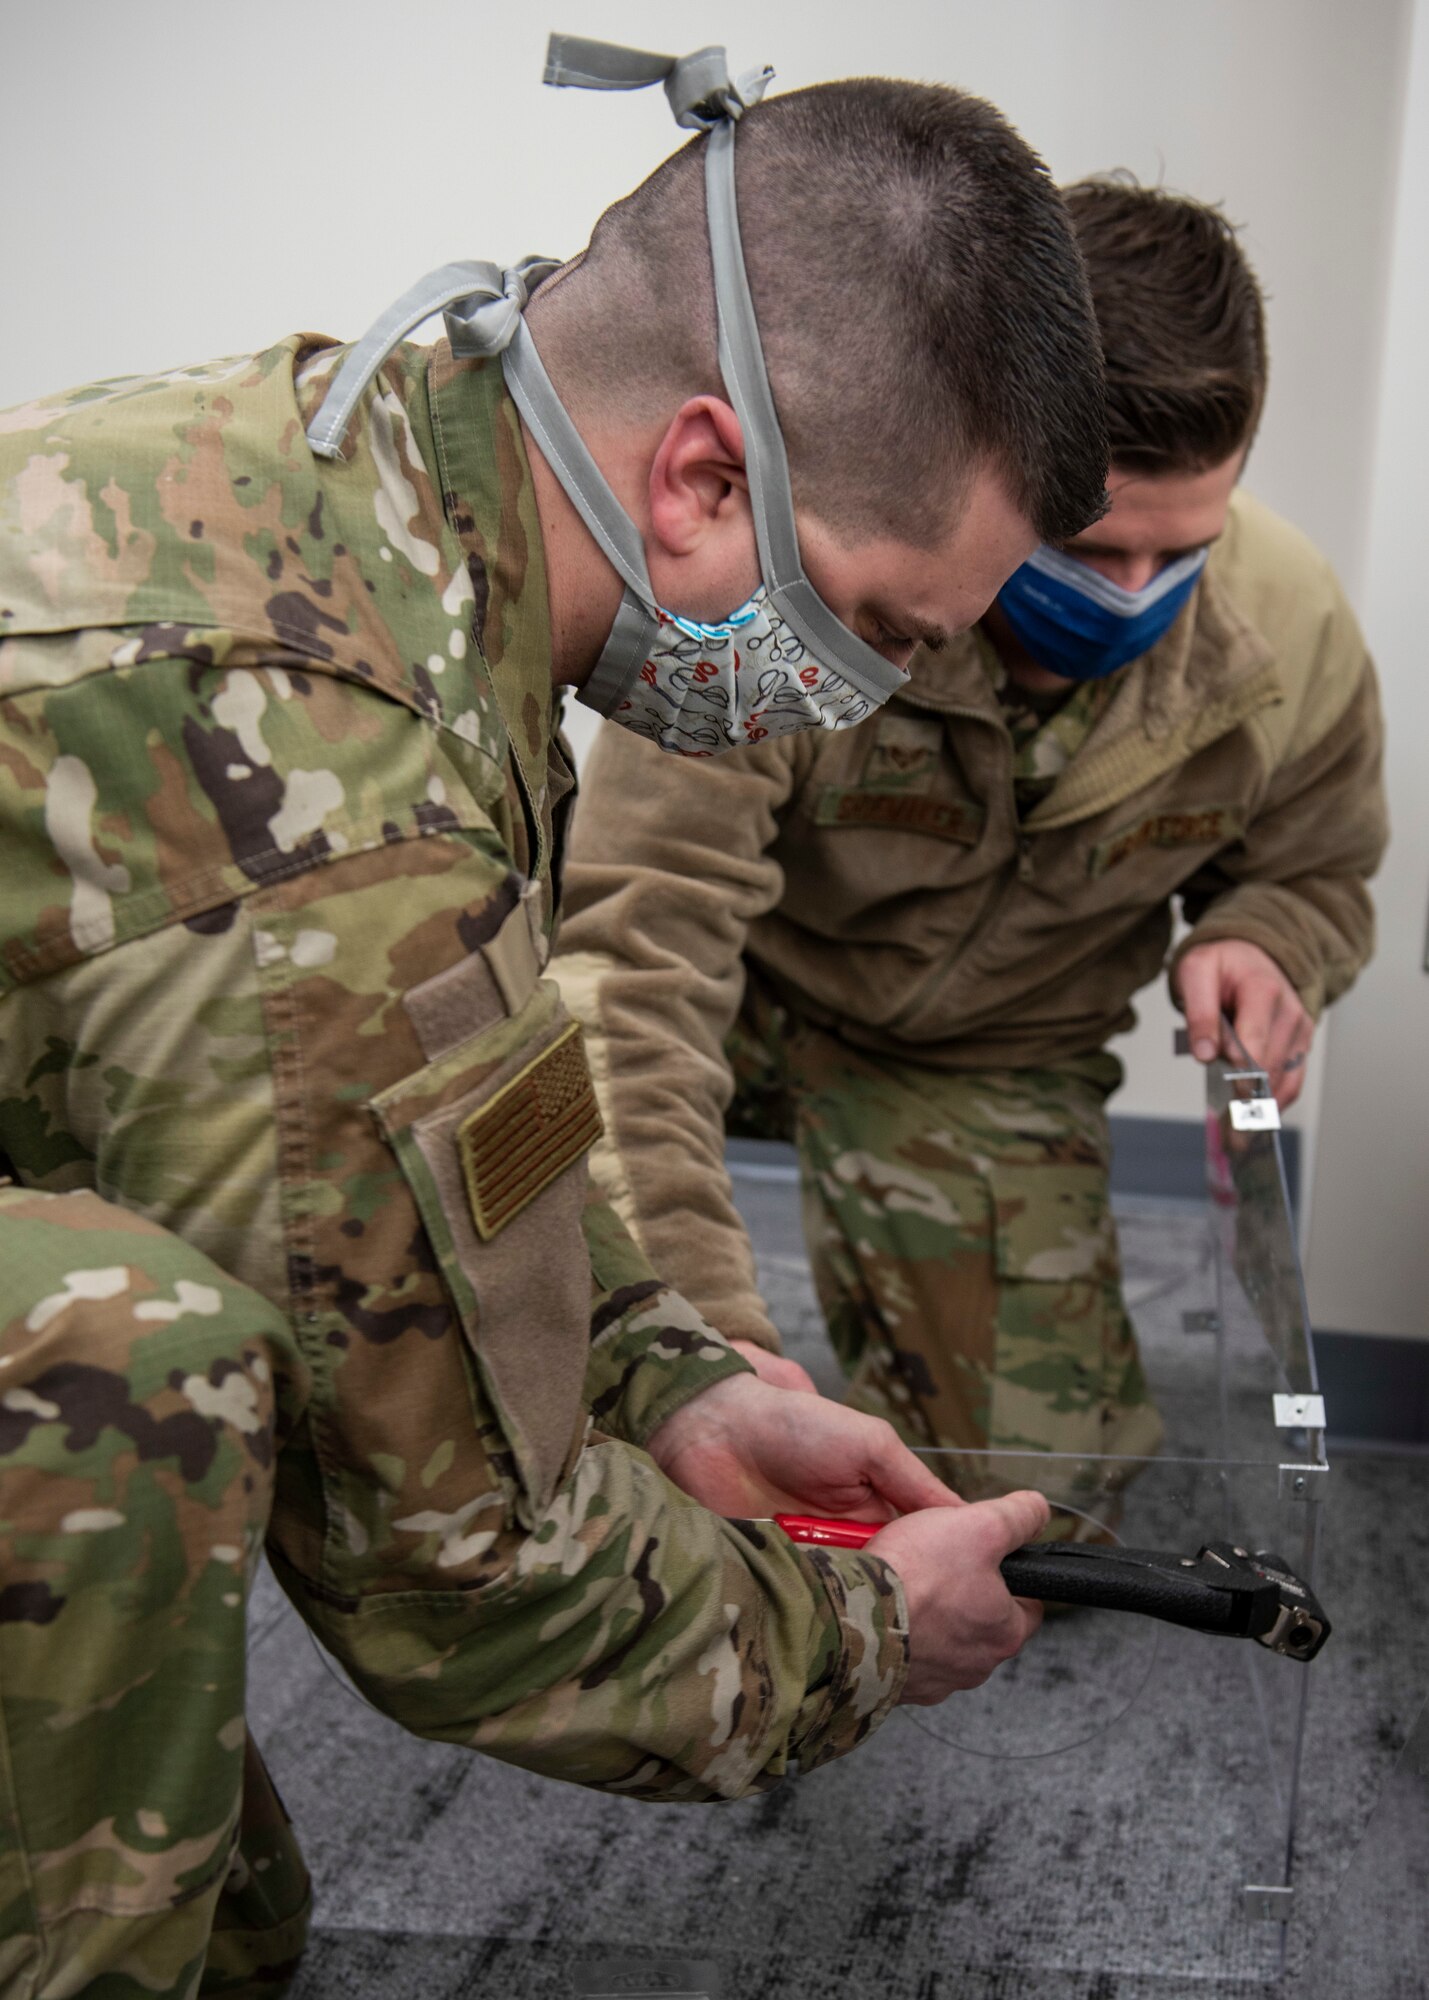 U.S. Air Force Staff Sgt. Andrew Taylor, 673d Medical Support Squadron medical logistics noncommissioned officer in charge of acquisitions, attaches a rivet to a plastic polycarbonate enclosure while U.S. Air Force Senior Airman Michael Shoemaker, 673d Medical Support Squadron biomedical equipment technician, holds the enclosure steady at Joint Base Elmendorf-Richardson, Alaska, April 7, 2020. Taylor and Shoemaker designed and built the reusable device to be a protective barrier between medical providers and a patient to prevent possible exposure to COVID-19 and other airborne diseases. The innovated enclosure can be placed over a patient’s head and upper torso prior to intubation or similar treatments, with access to the patient via two holes at the head of the enclosure for a physician's hands and arms, and two side doors for additional access.